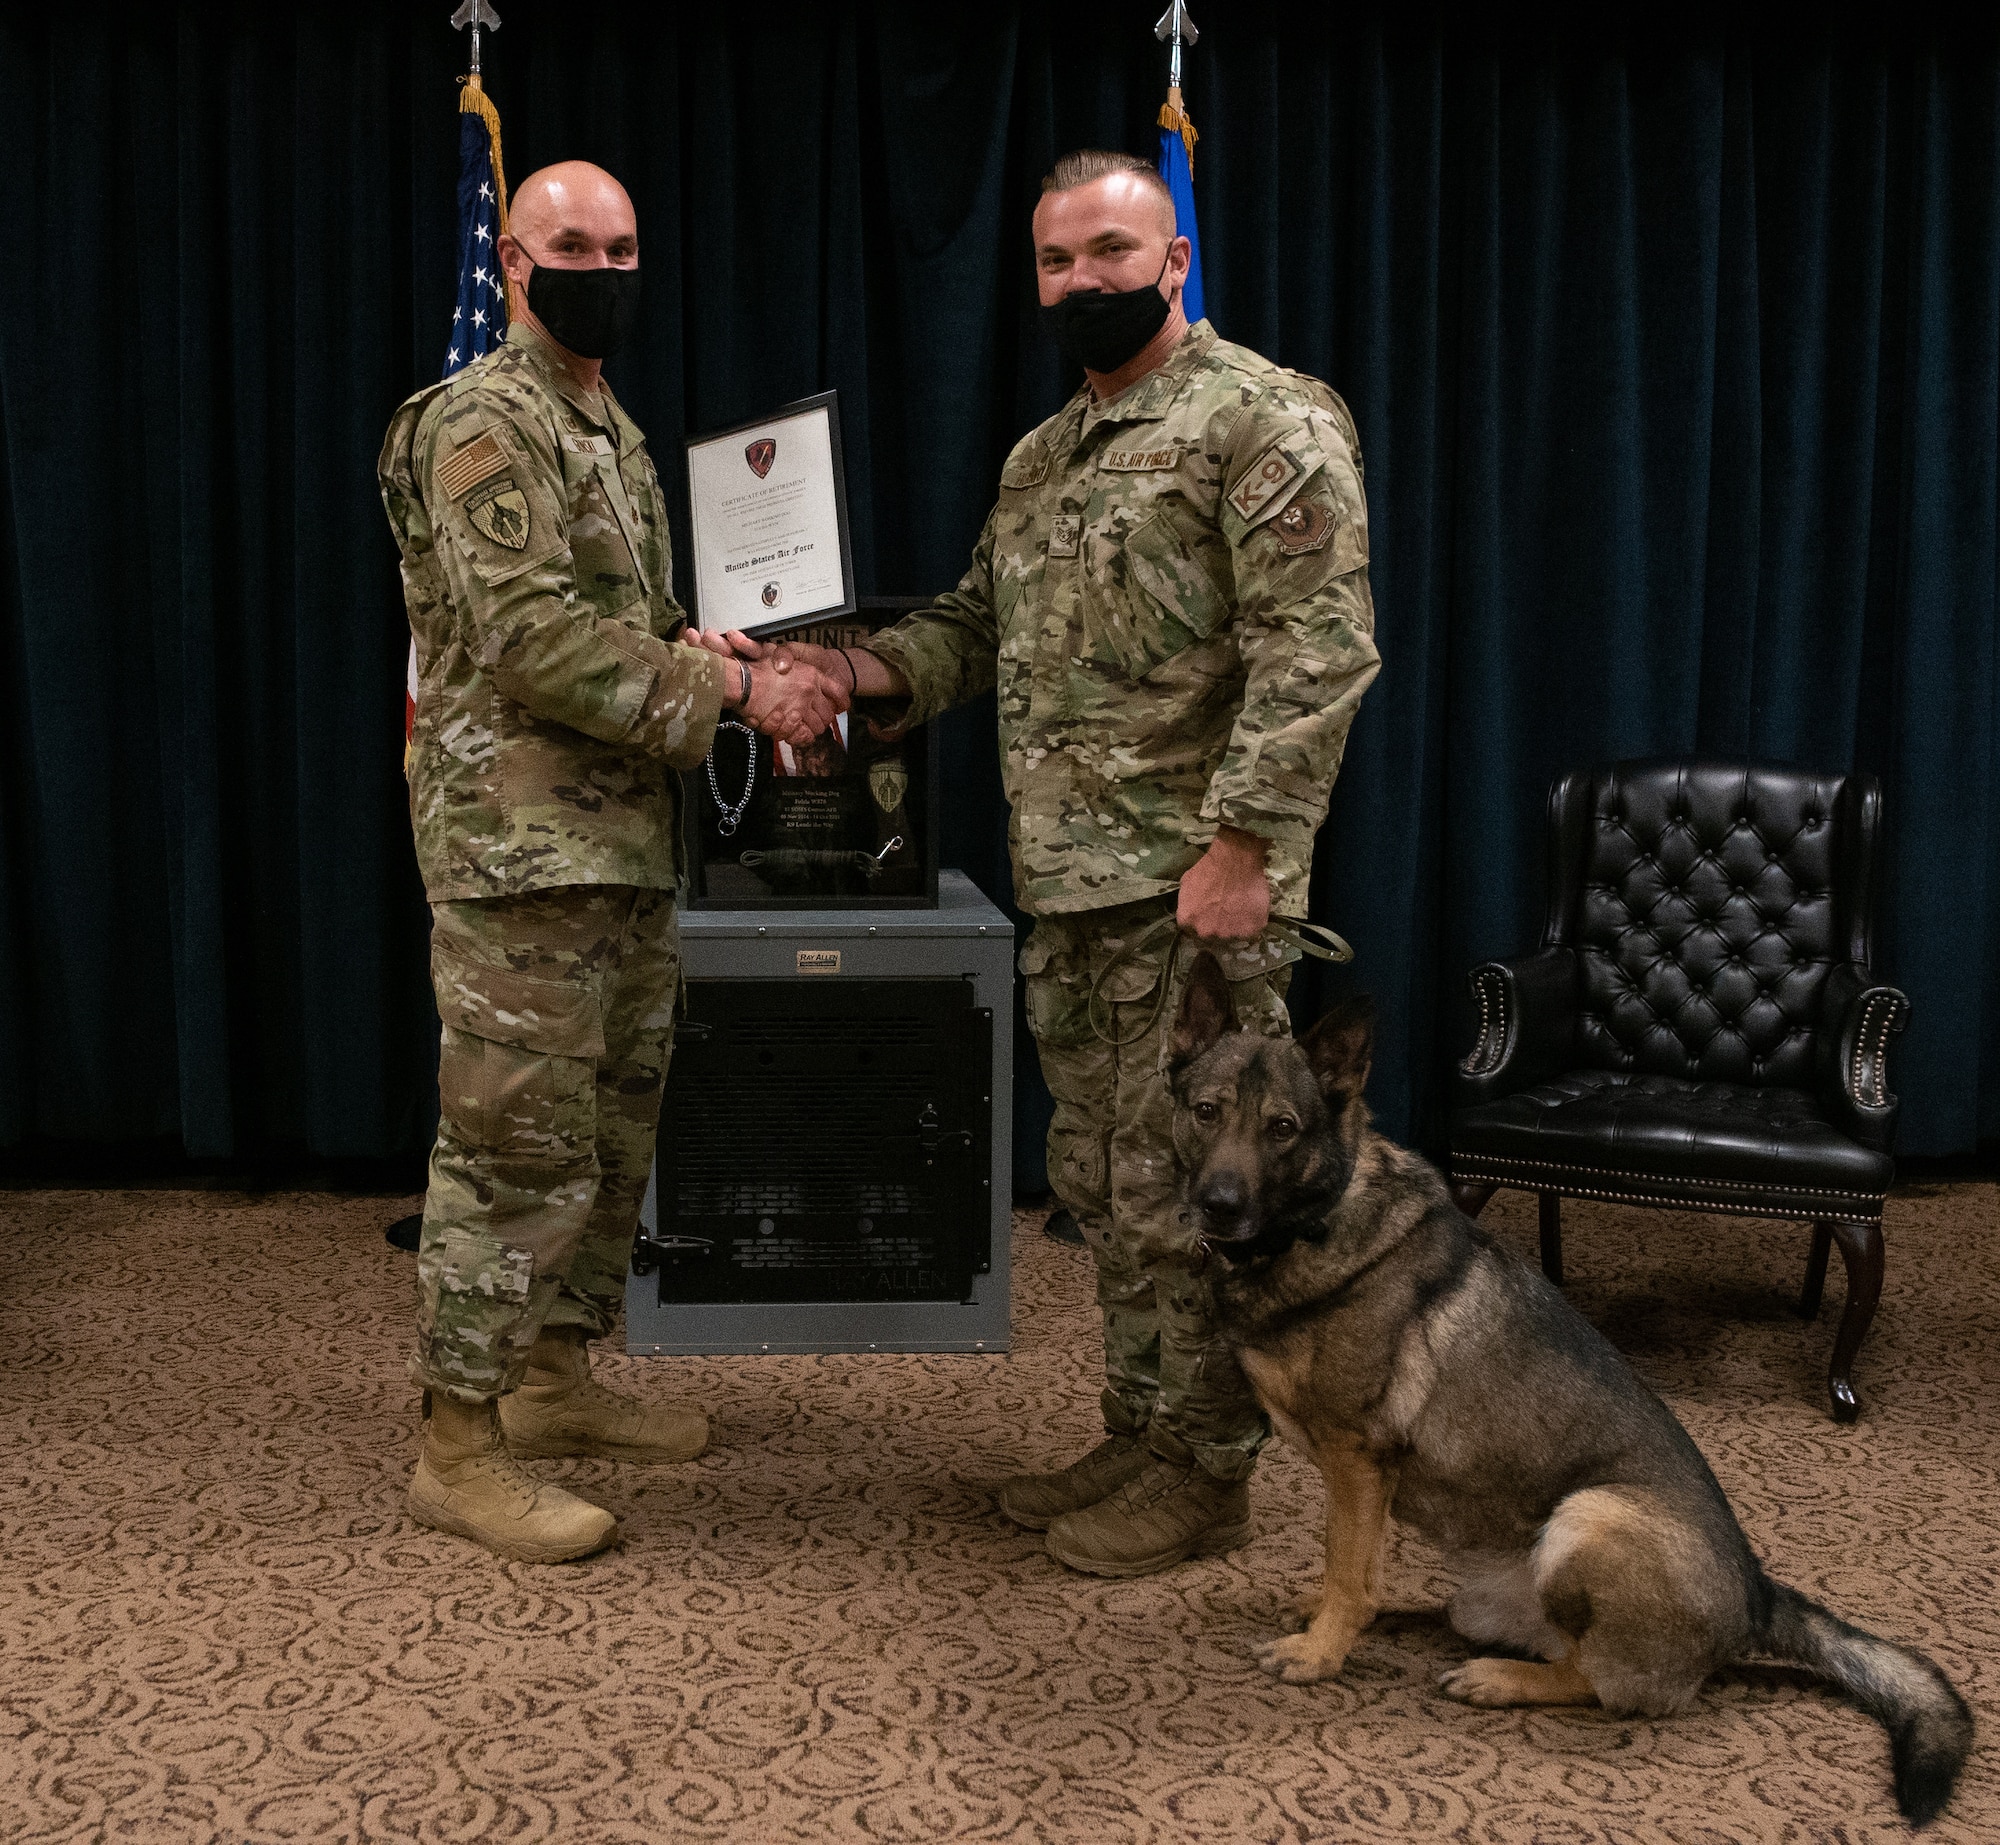 U.S. Air Force Maj. Harlan Glinski, 27th Special Operations Security Forces Squadron commander, presents a certificate of retirement to Military Working Dog Fulda W378, 27 SOSFS K-9 and his handler and adopter U.S. Air Force Staff Sgt. Michael Herman, 27 SOSFS K-9 handler at Fulda’s retirement ceremony on Cannon AFB, N.M., Nov 16, 2021. The dedication of MWD’s to their duties is deserving of an official retirement ceremony, as they play a monumental role in the safety of service members at home and down range. (U.S. Air Force photo by Senior Airman Christopher Storer)